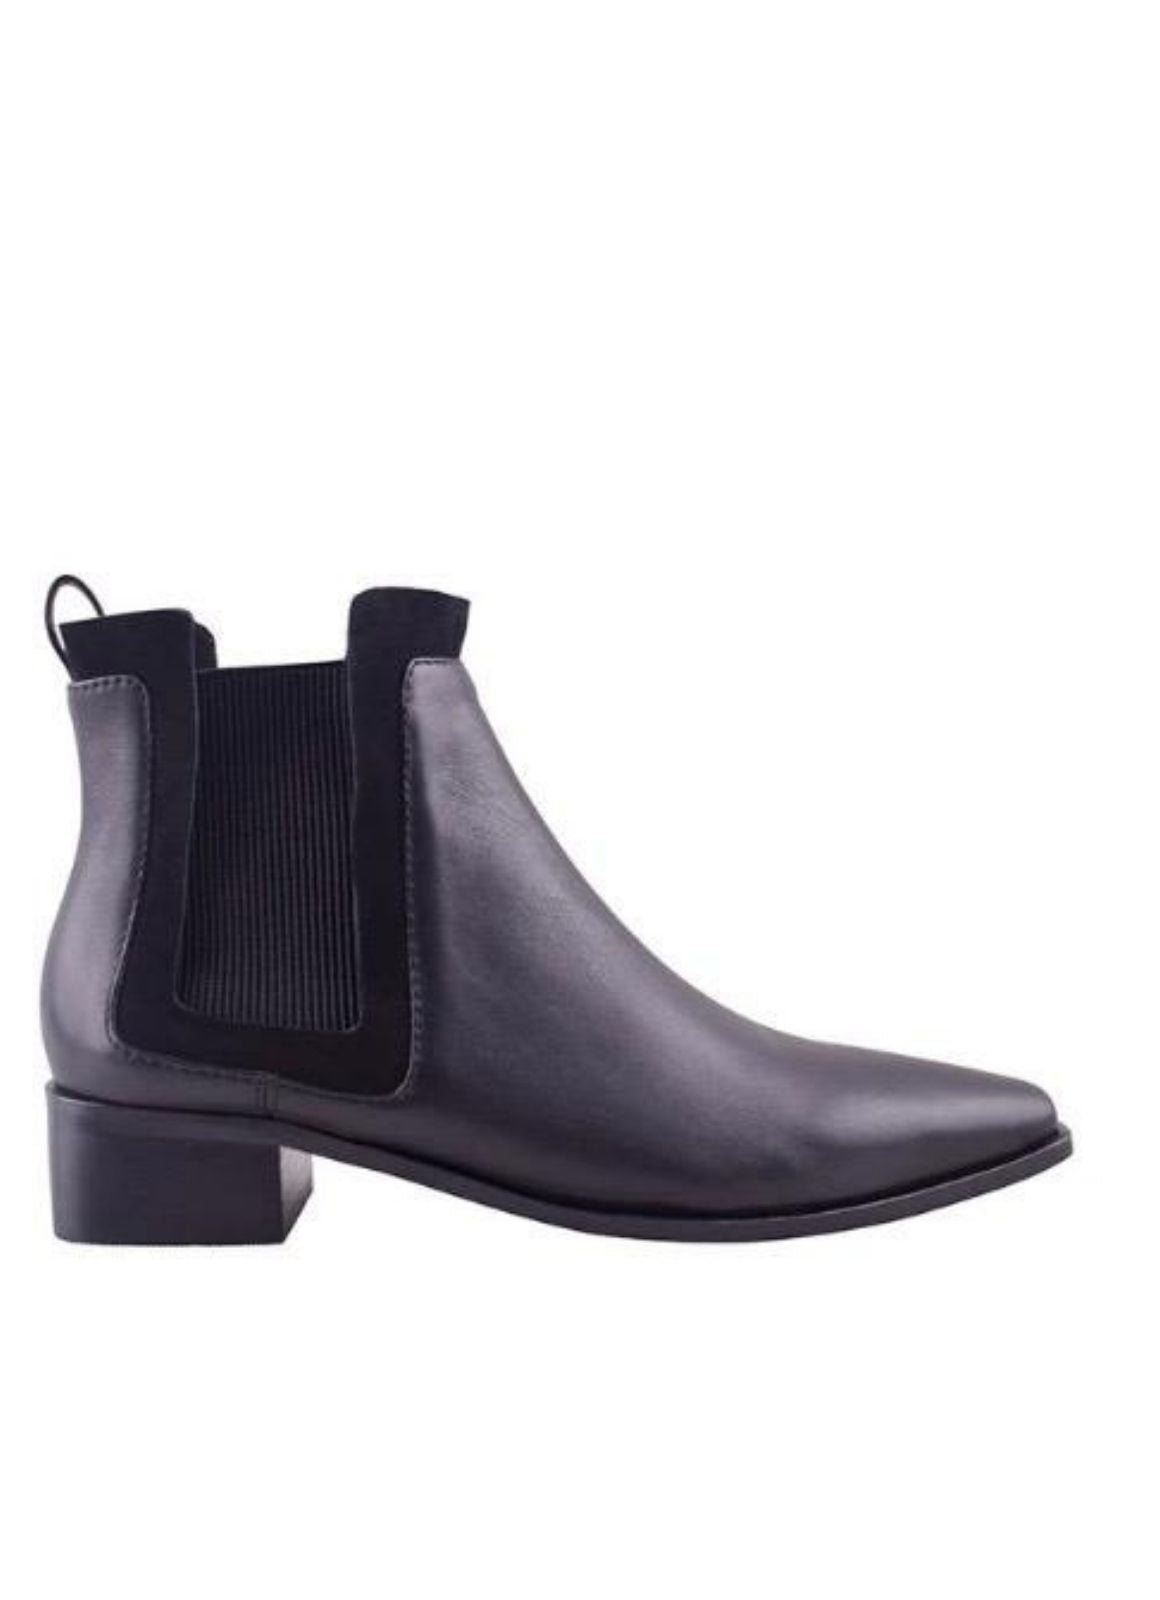 Sol Sana Waverly Ankle Boot Black Leather